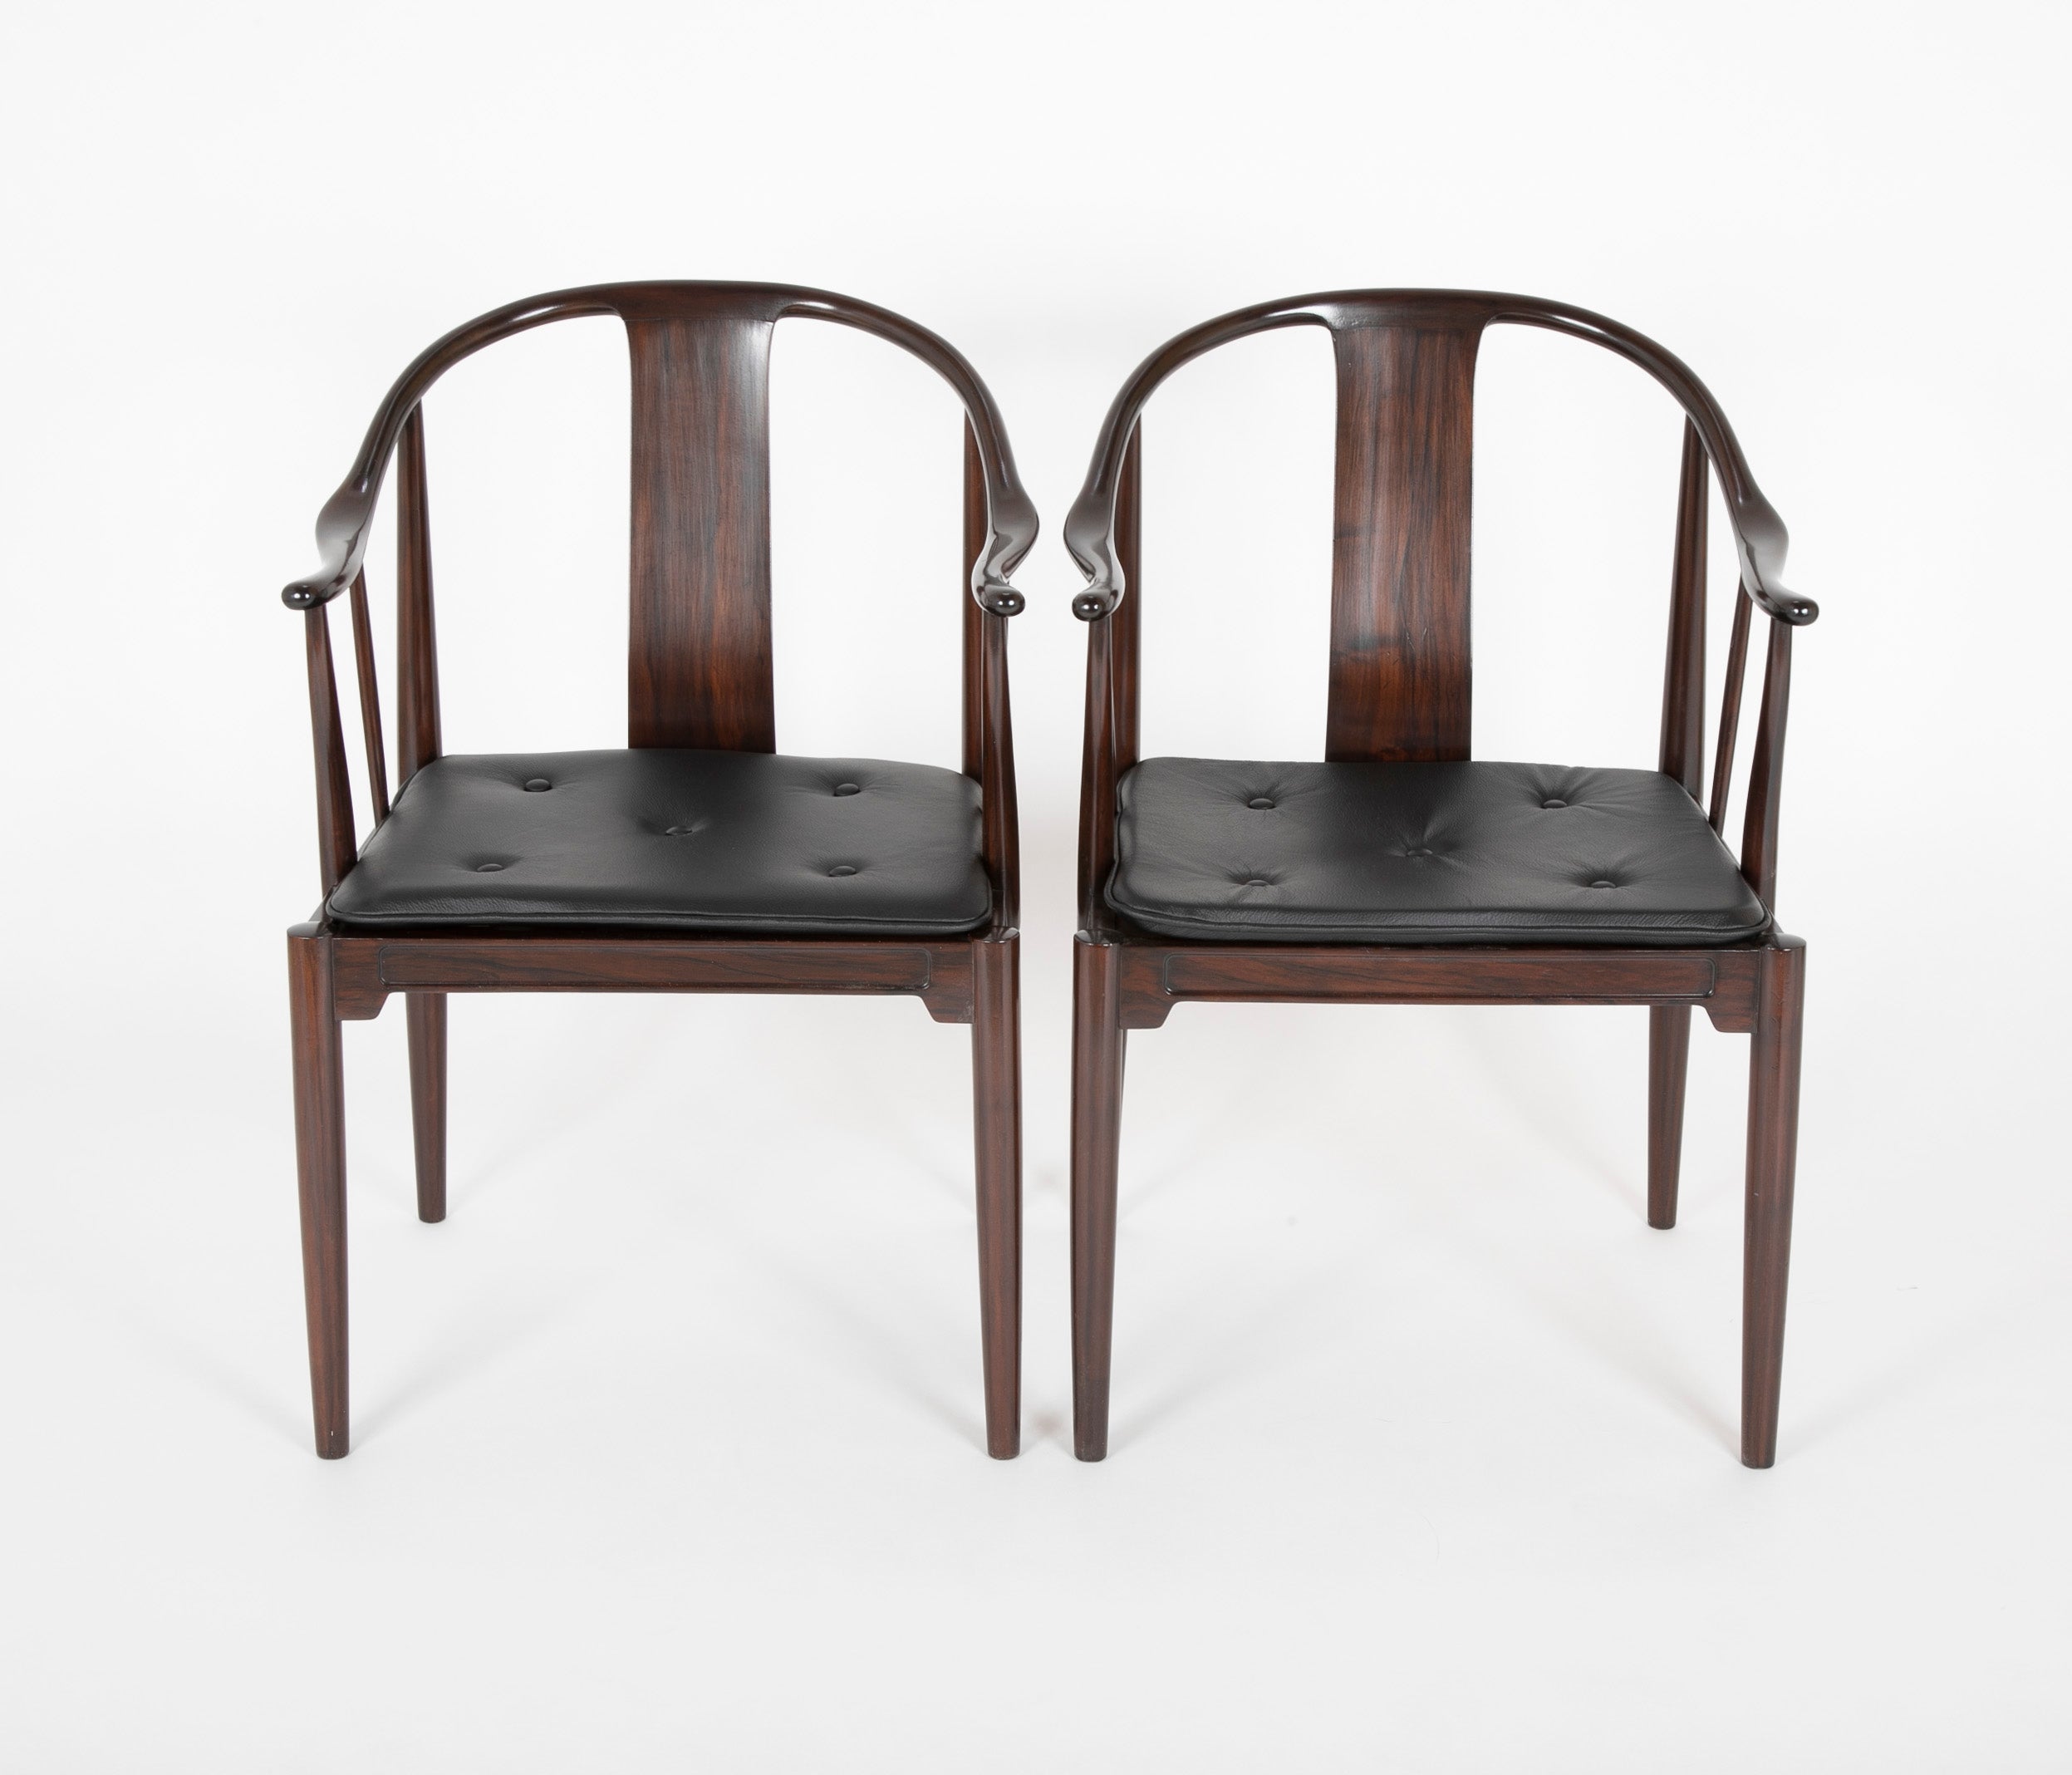 Set of Four "China Chairs" for Fritz Hansen by Hans Wegner